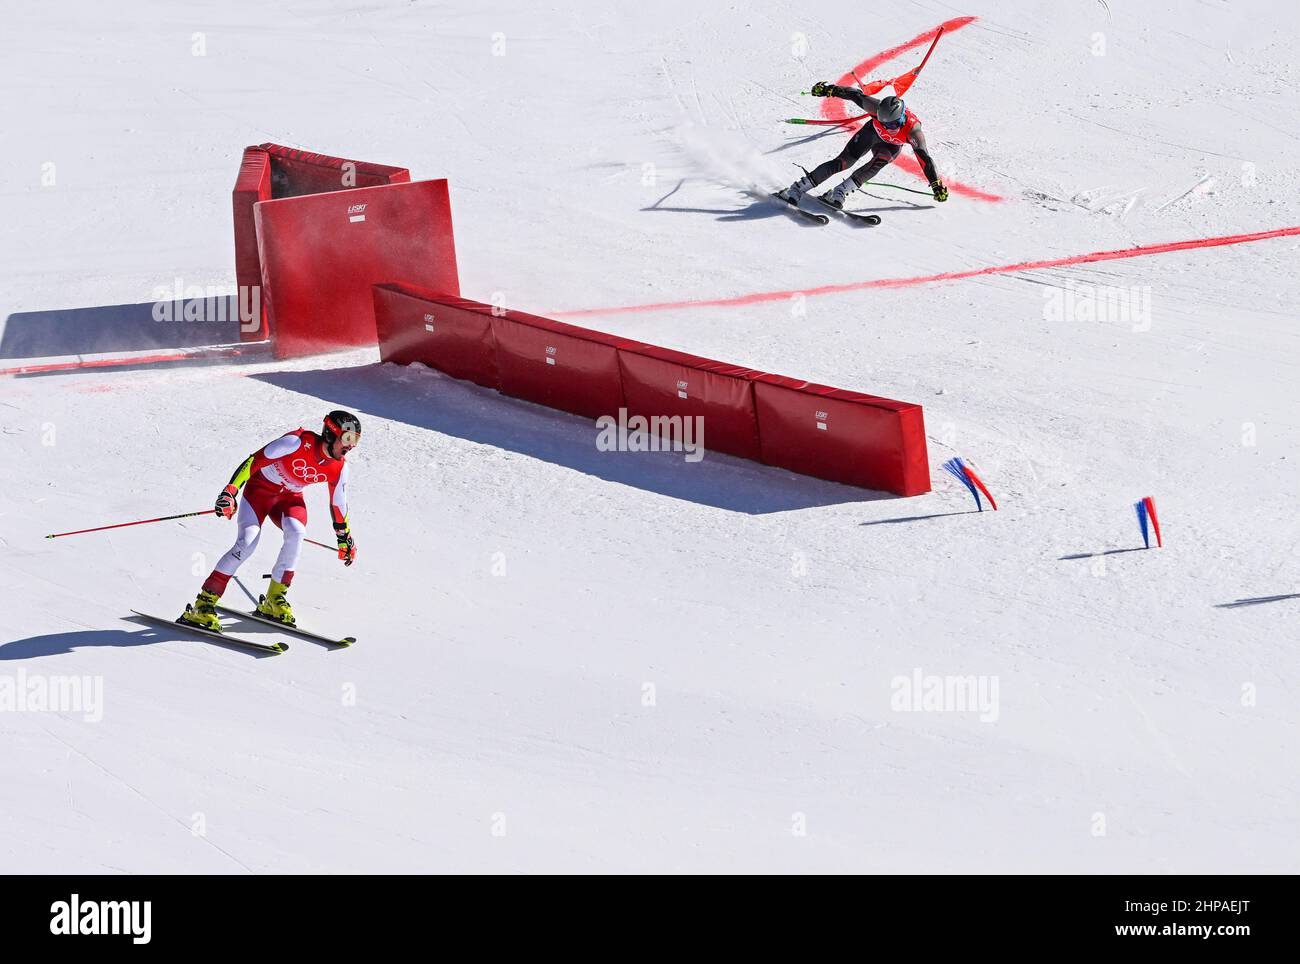 Beijing, China. 20th Feb, 2022. Stefan Brennsteiner (L) of Austria and Timon Haugan of Norway compete during the alpine skiing mixed team parallel semifinal of Beijing 2022 Winter Olympics at National Alpine Skiing Centre in Yanqing District, Beijing, capital of China, Feb. 20, 2022. Credit: Lian Zhen/Xinhua/Alamy Live News Stock Photo